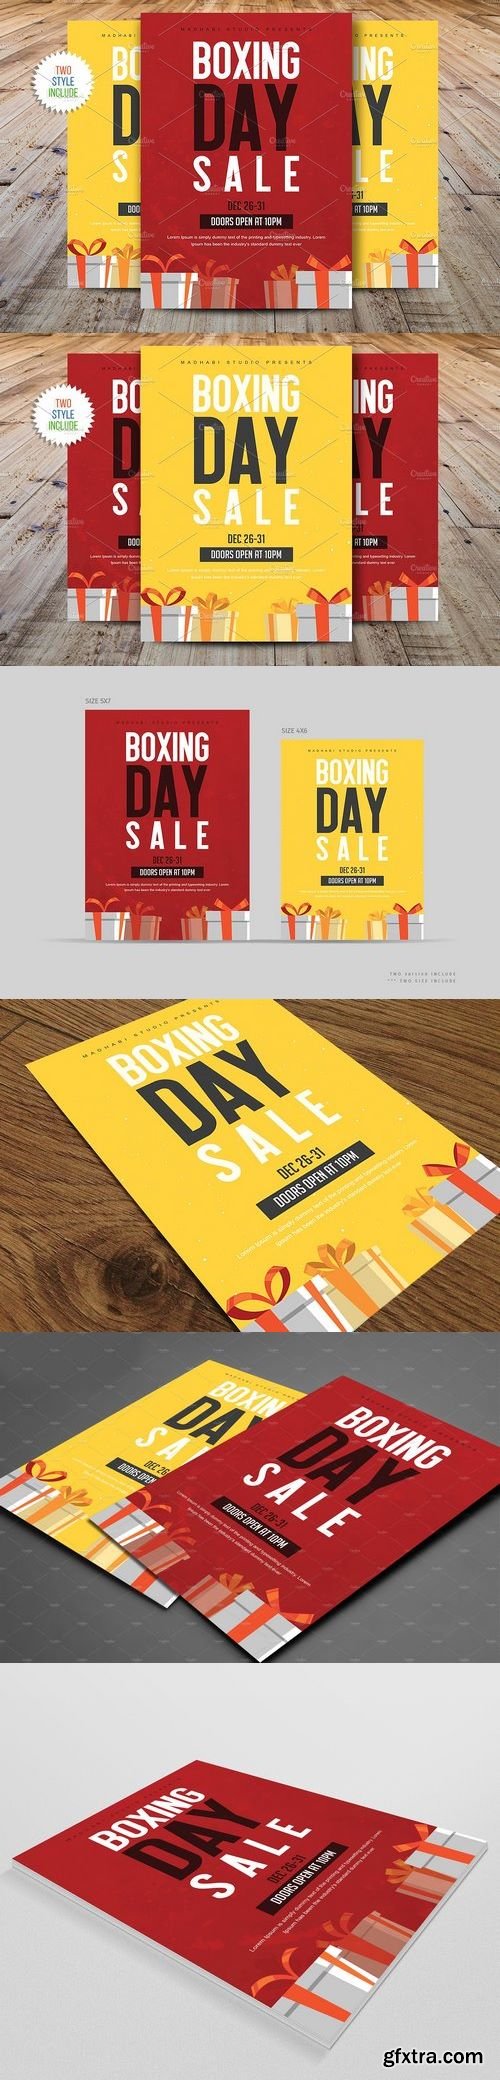 CM - Boxing Day Sale Flyer Template 2062850